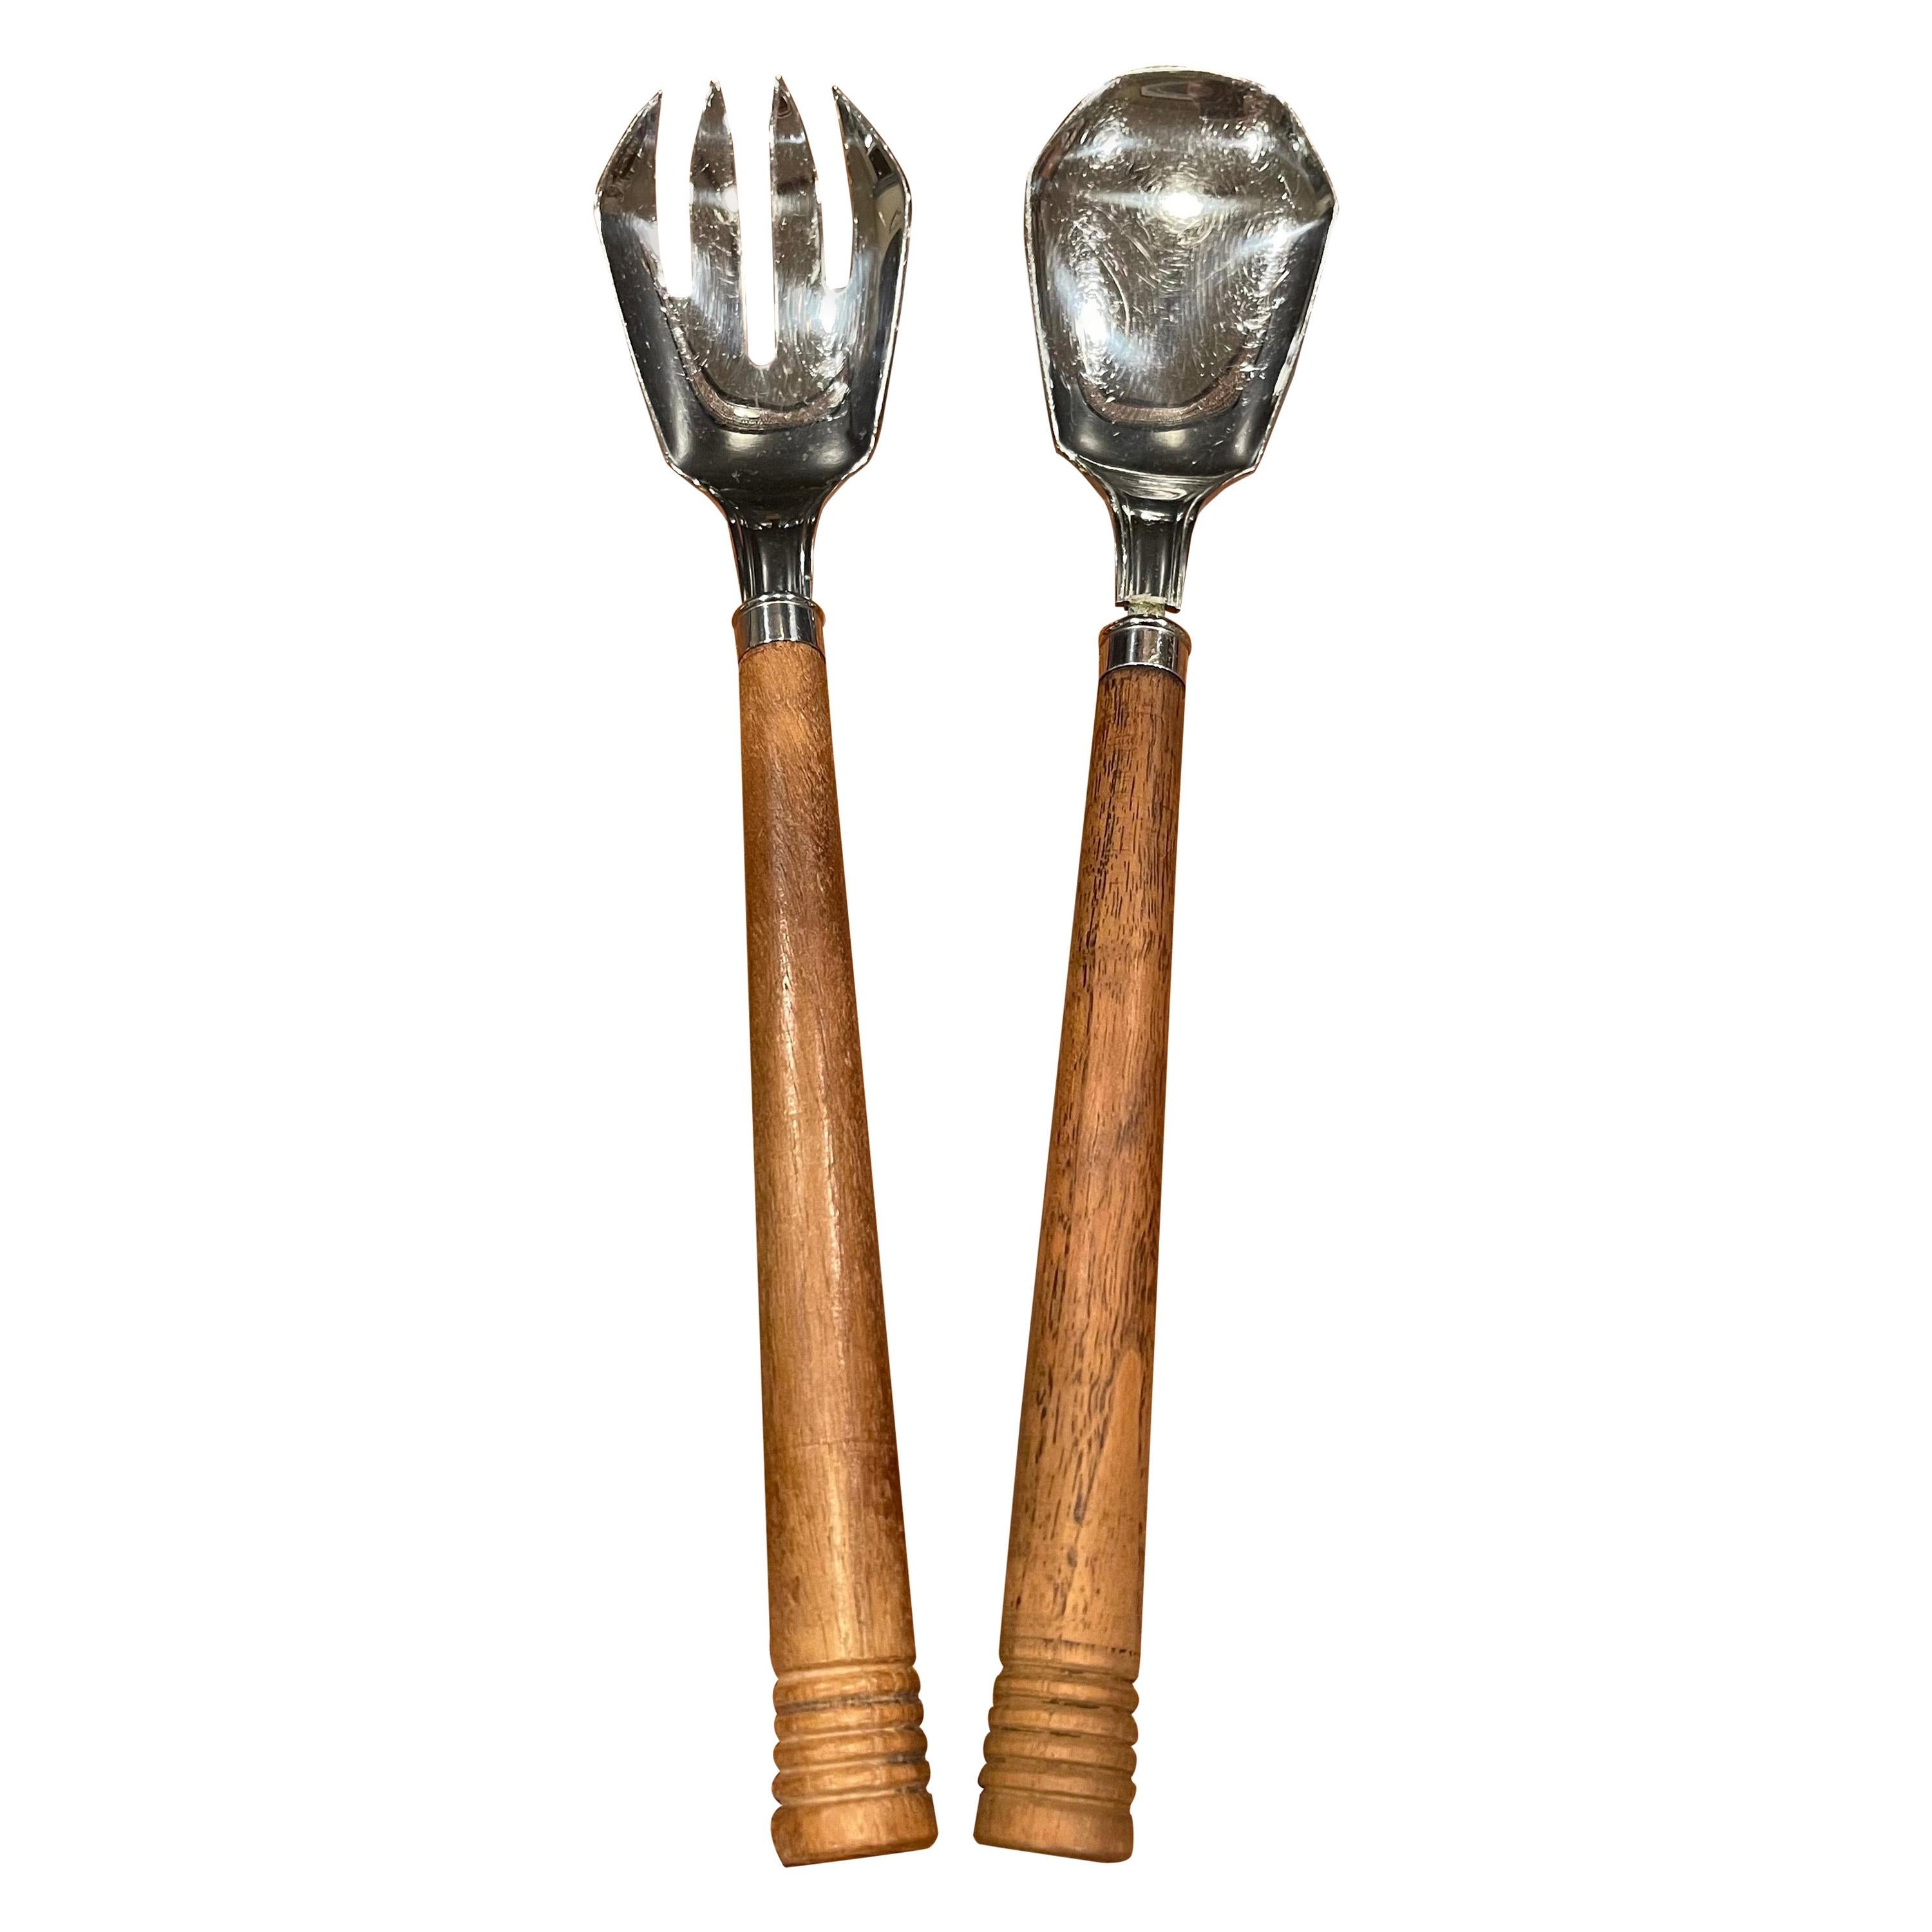 Walnut & Stainless Steel Art Deco Salad Servers by Chase & Co.